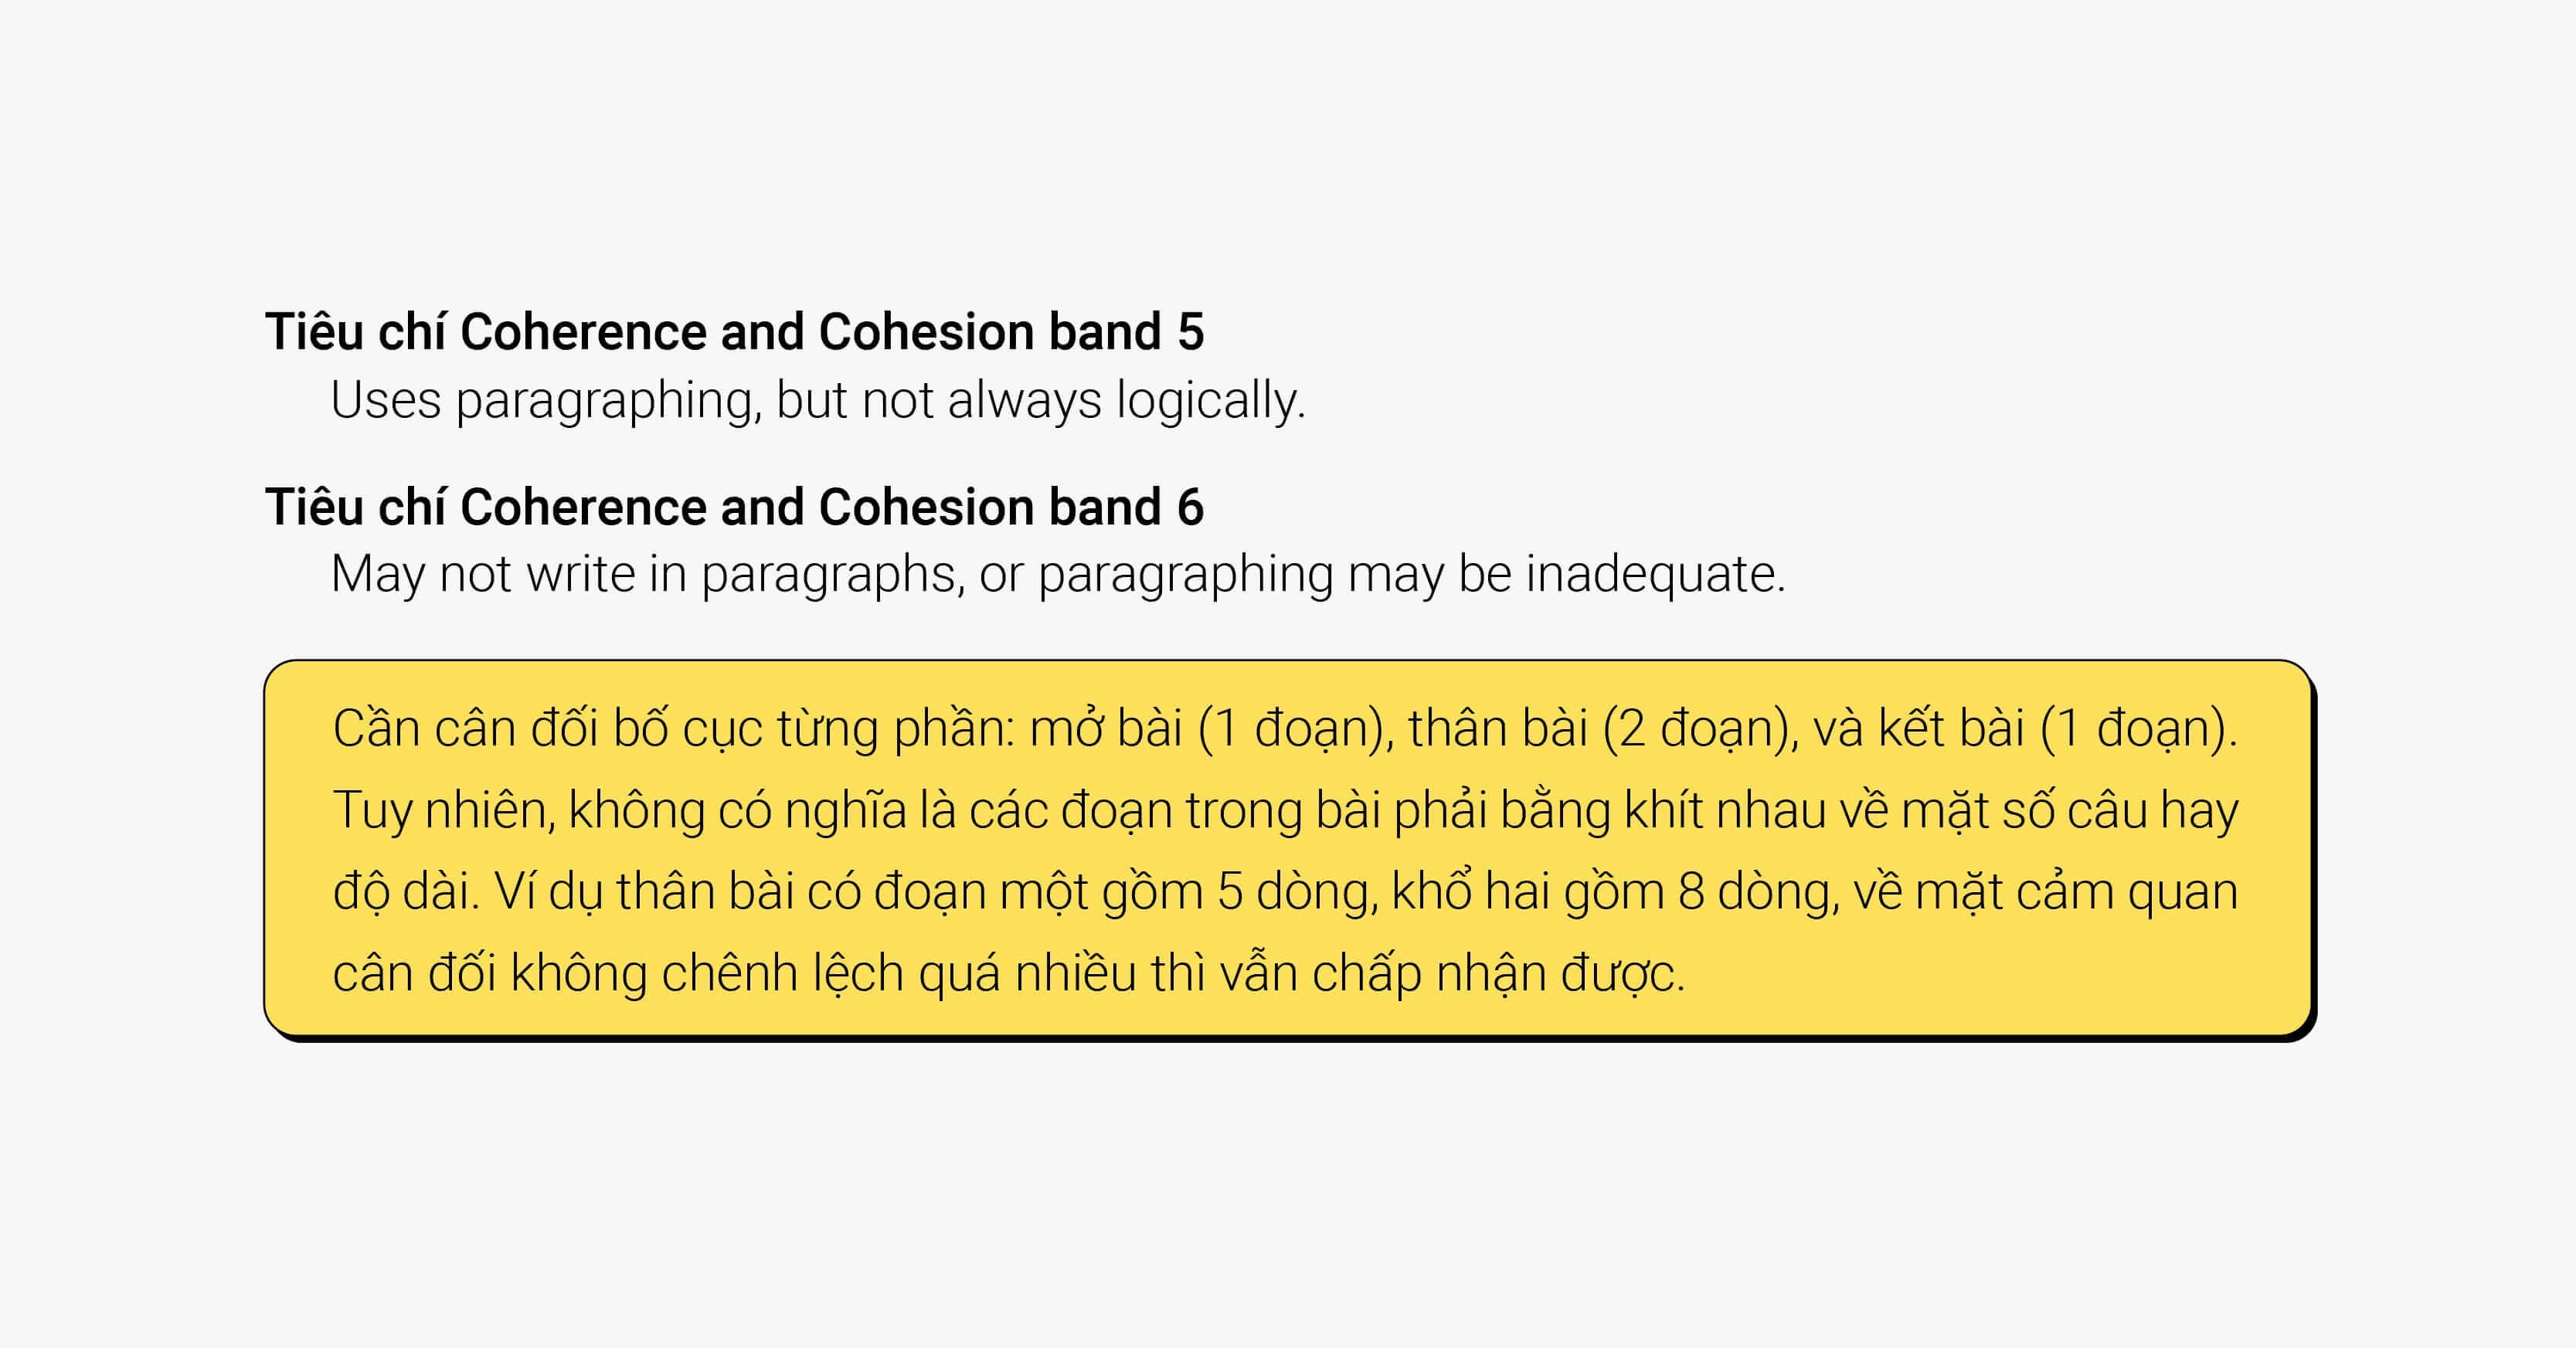 cach-cai-thien-ielts-writing-band-5-0-len-6-0-tieu-chi-coherence-and-cohesion-va-lexical-resource